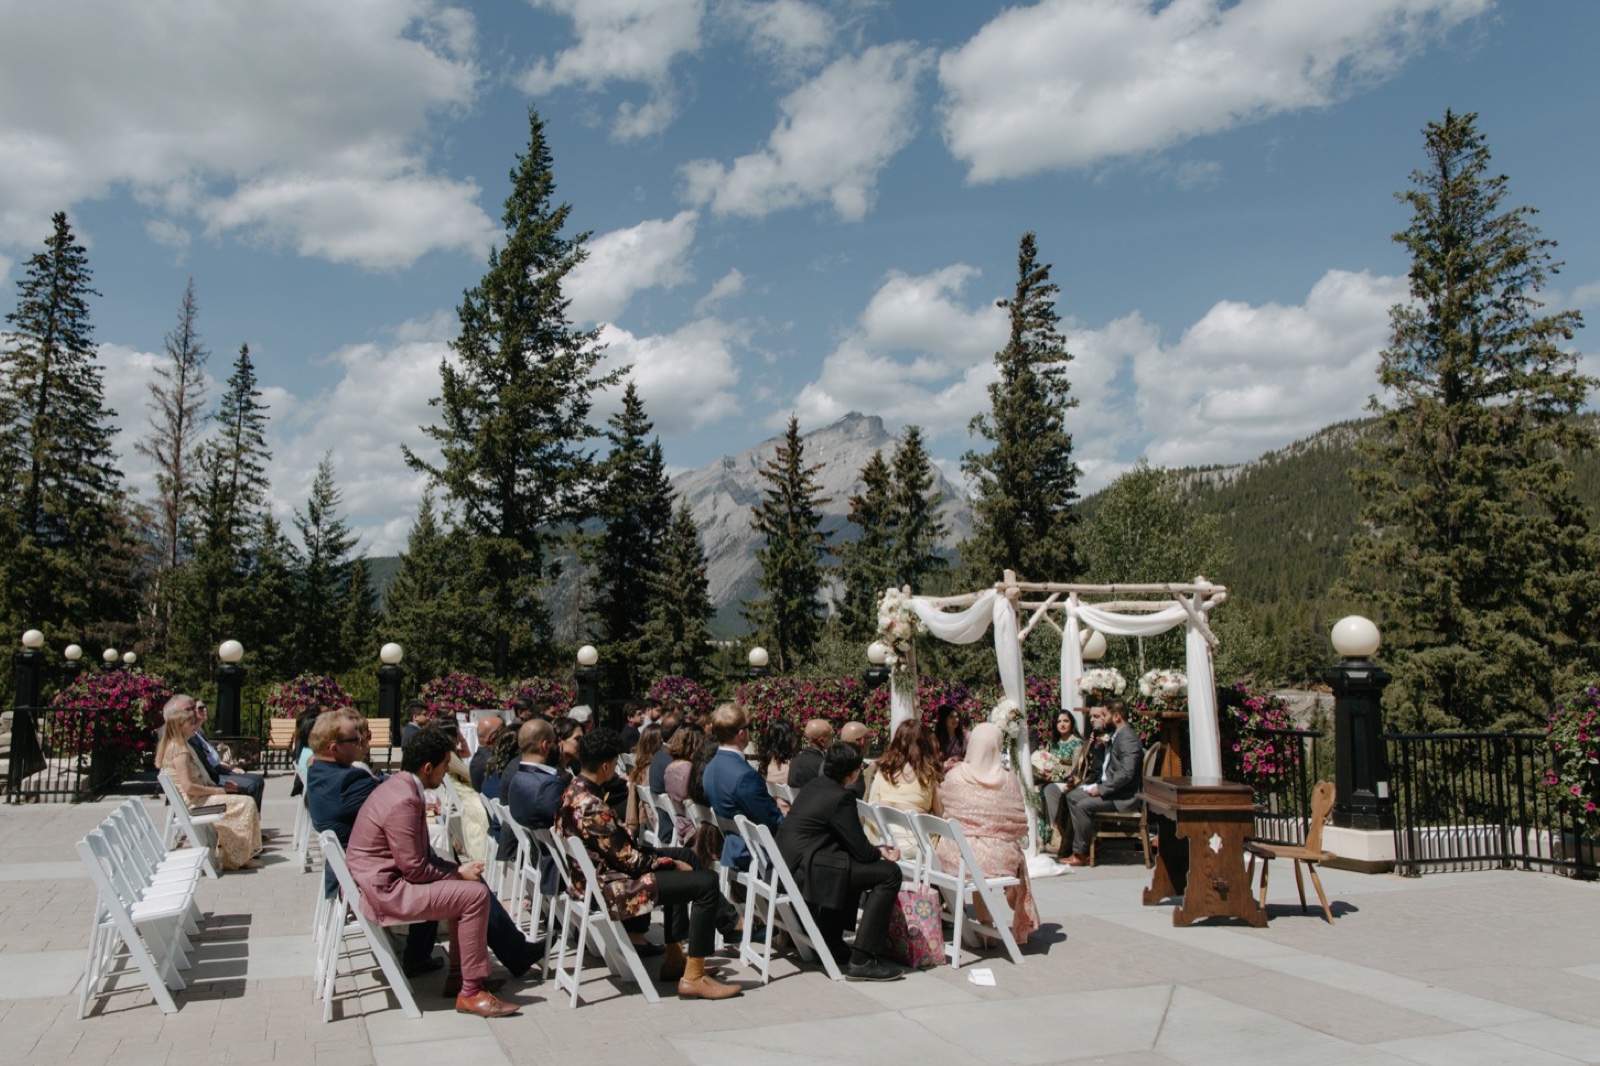 Colourful muslim wedding ceremony on the Outdoor Terrace at the Fairmont Banff Springs Hotel